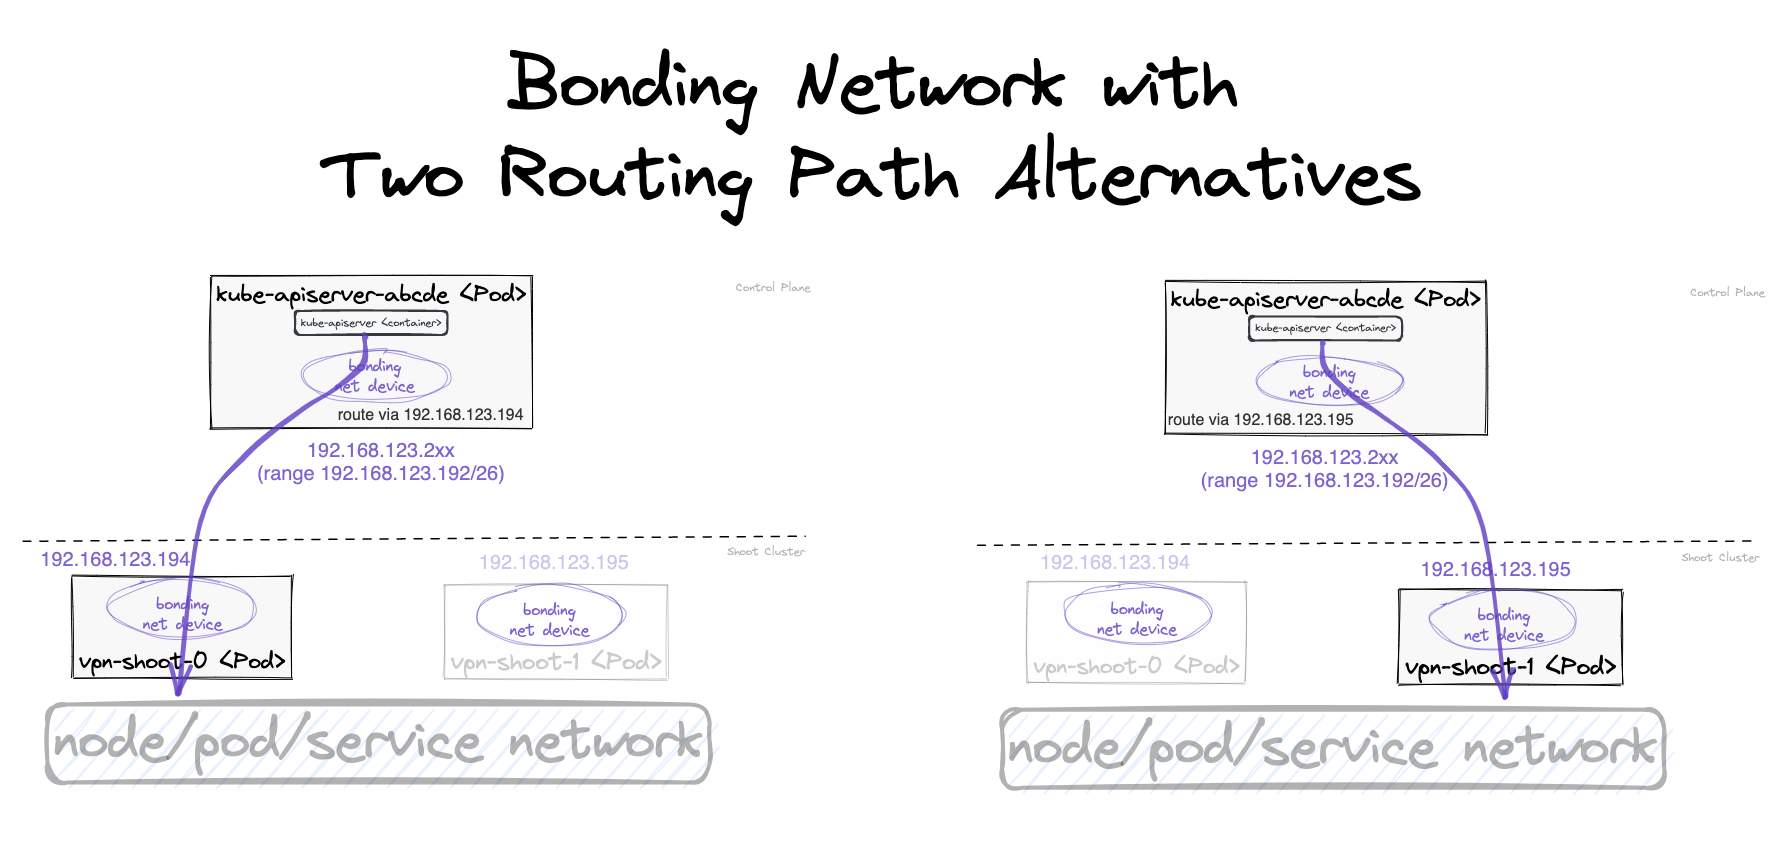 Four possible routing paths